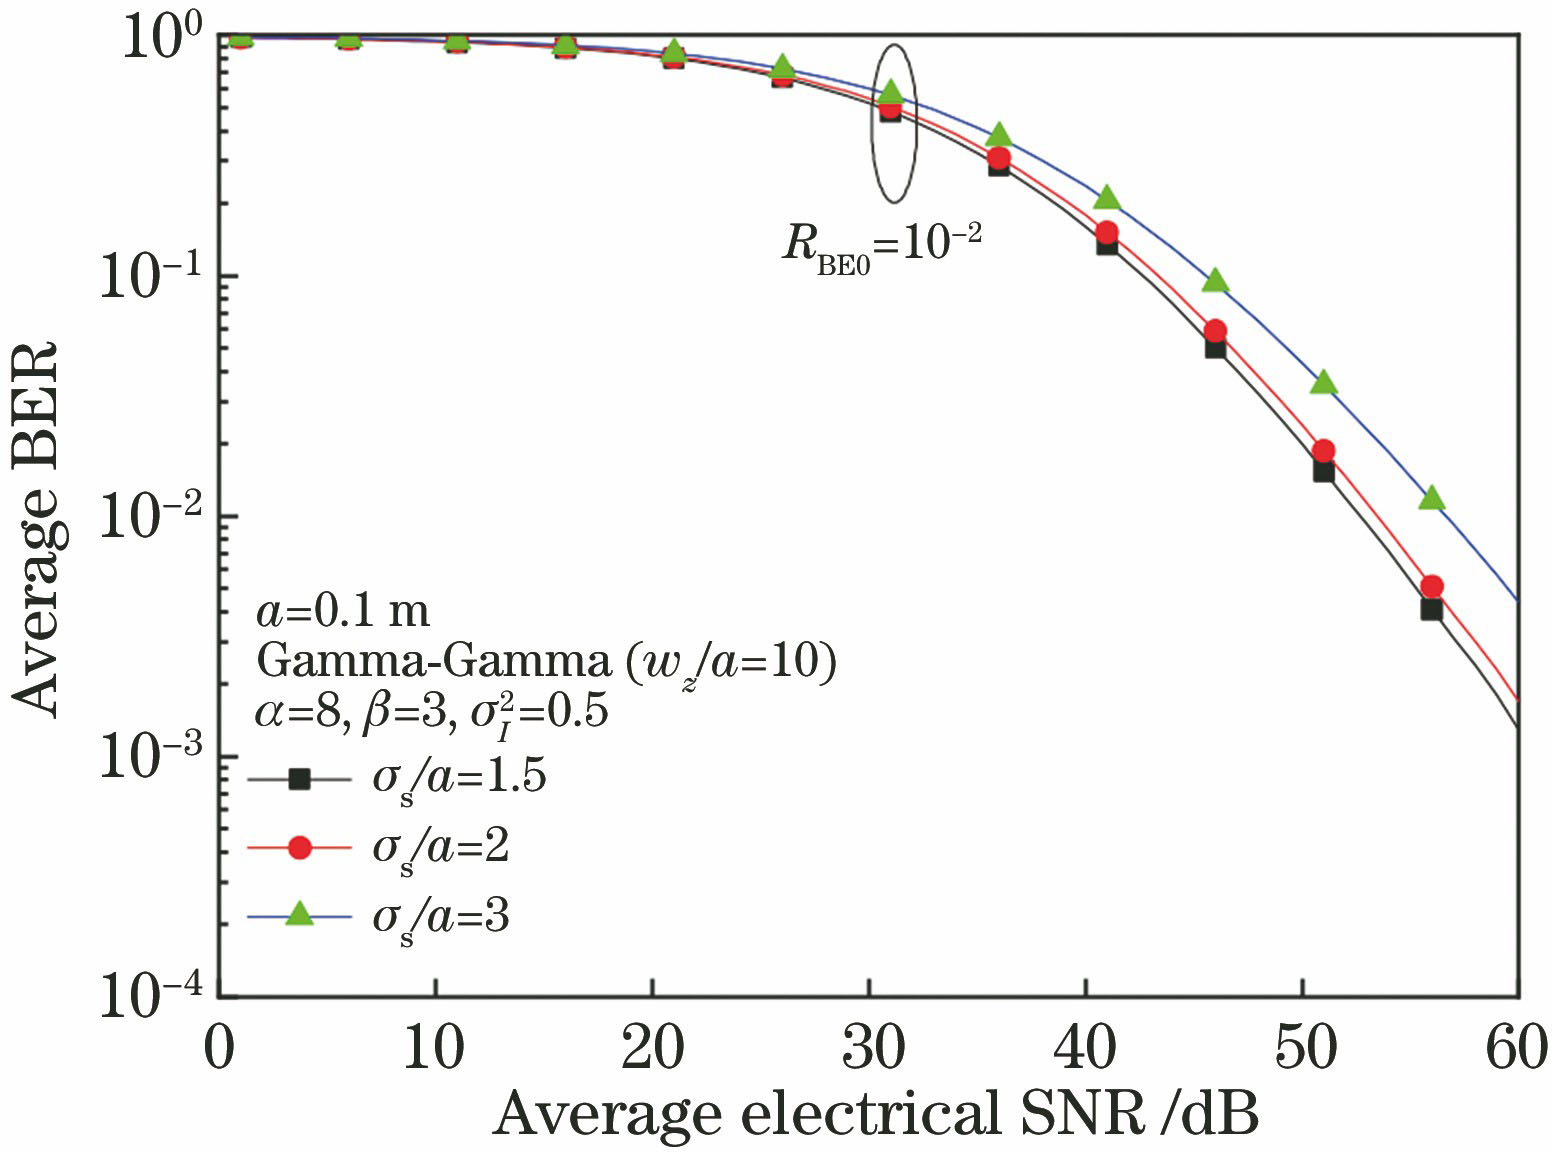 Average BER of non-adaptive BPSK system varying with σs value